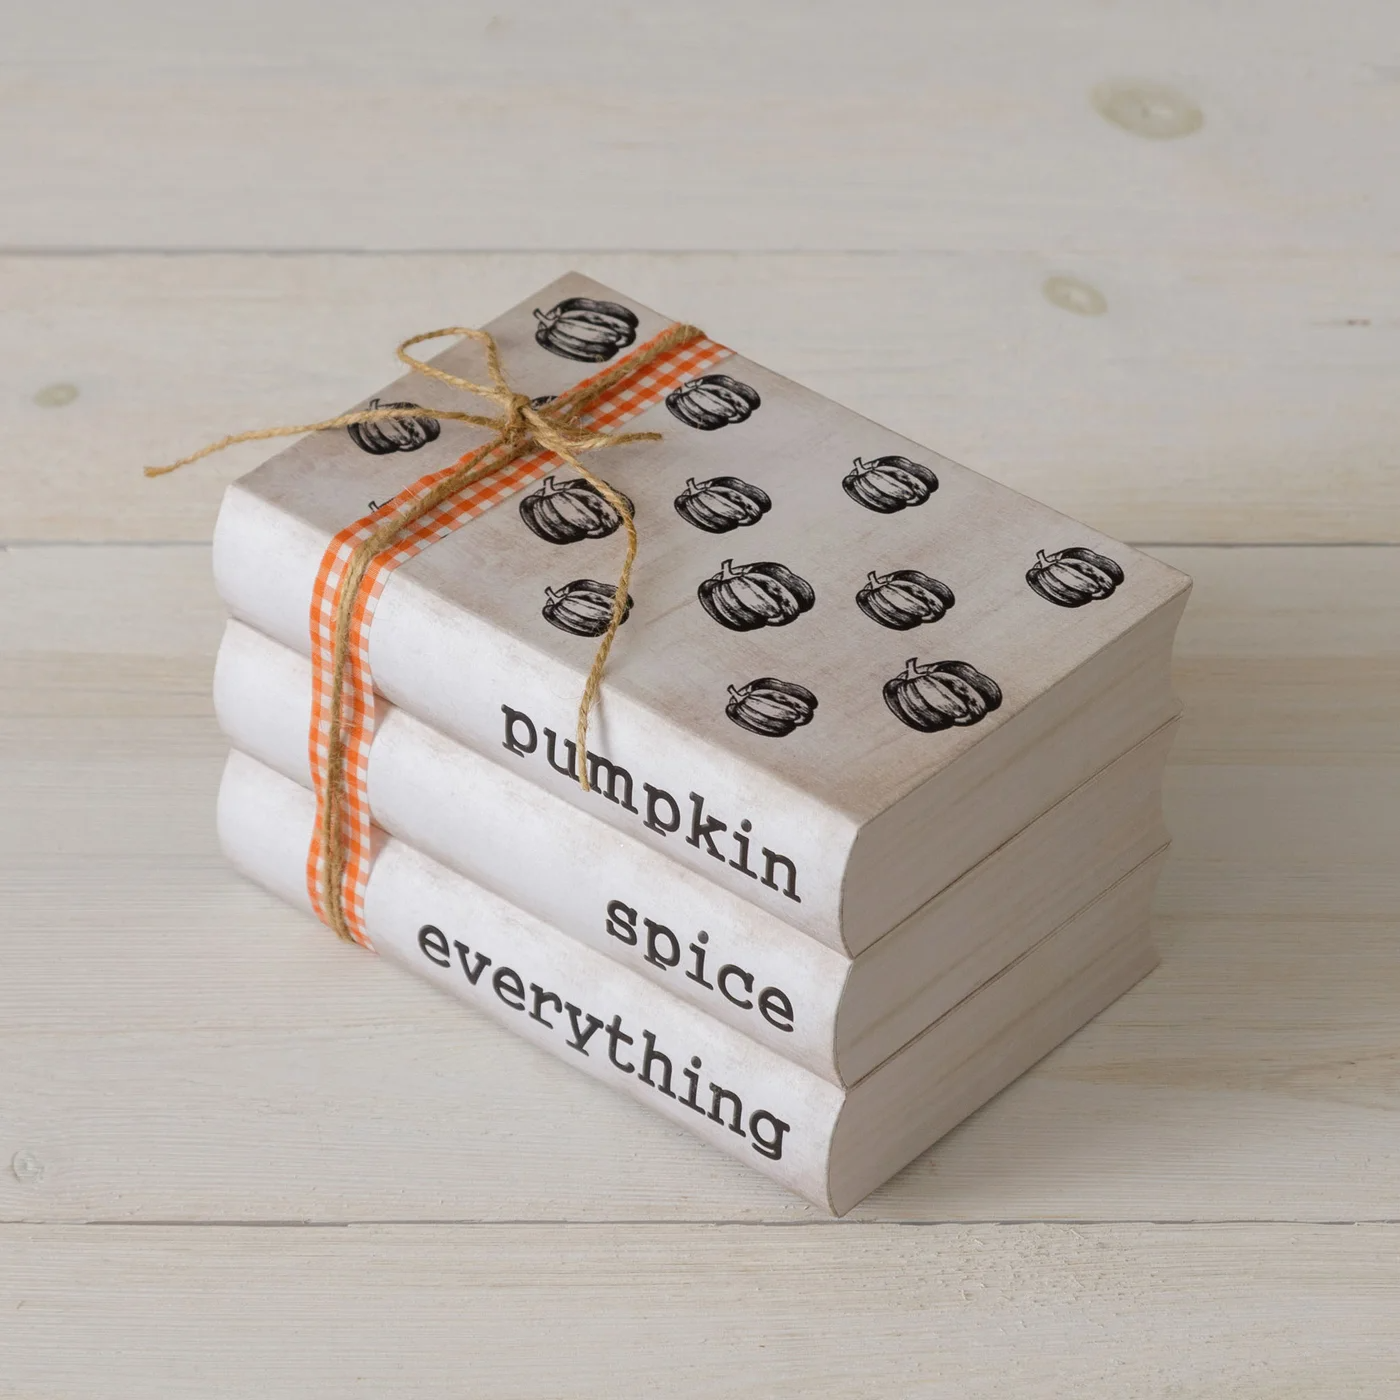 Pumpkin Spice Everything Stacked Books Decoration